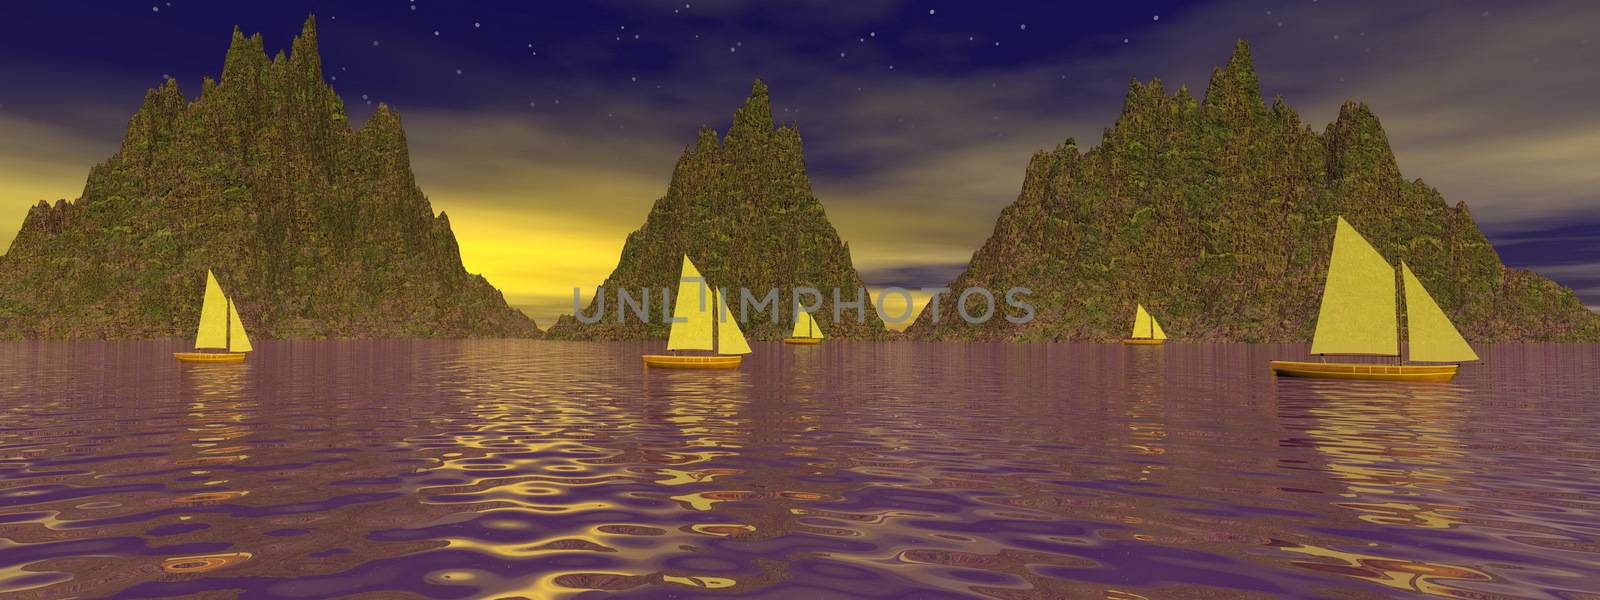 sailboats in a natural landscape